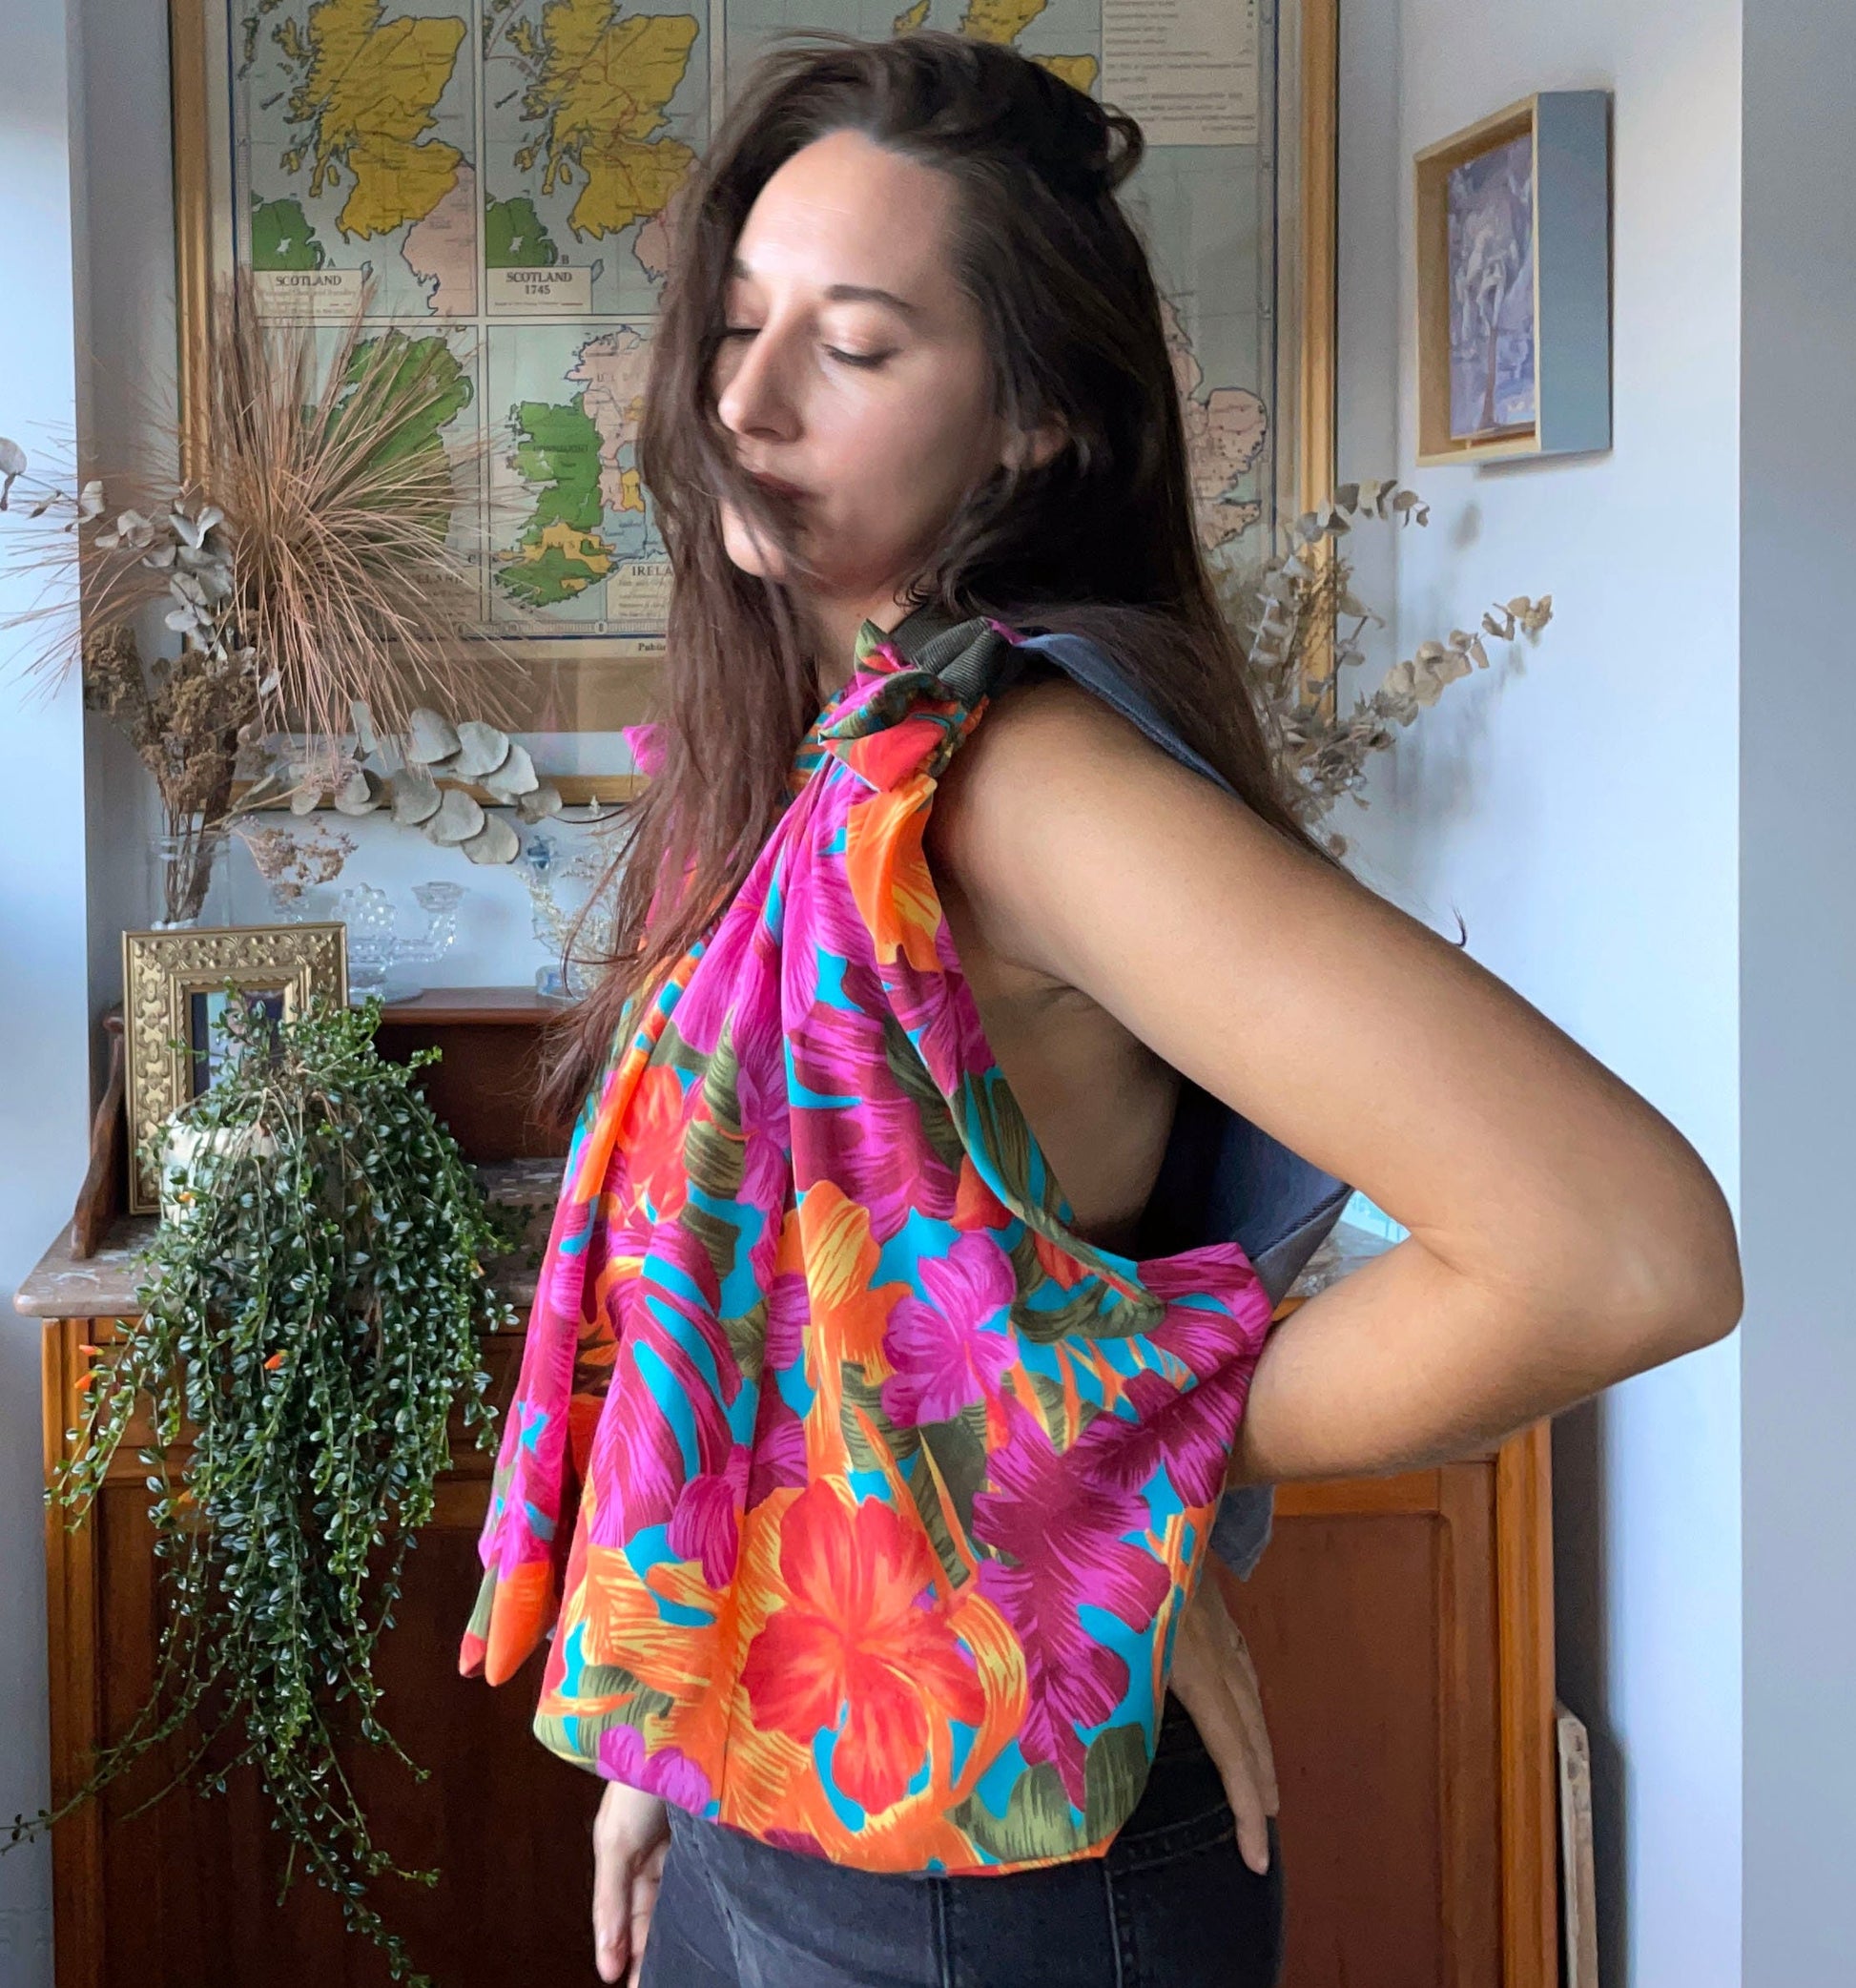 UP-cycled Textiles Super Vest - Recycled Materials